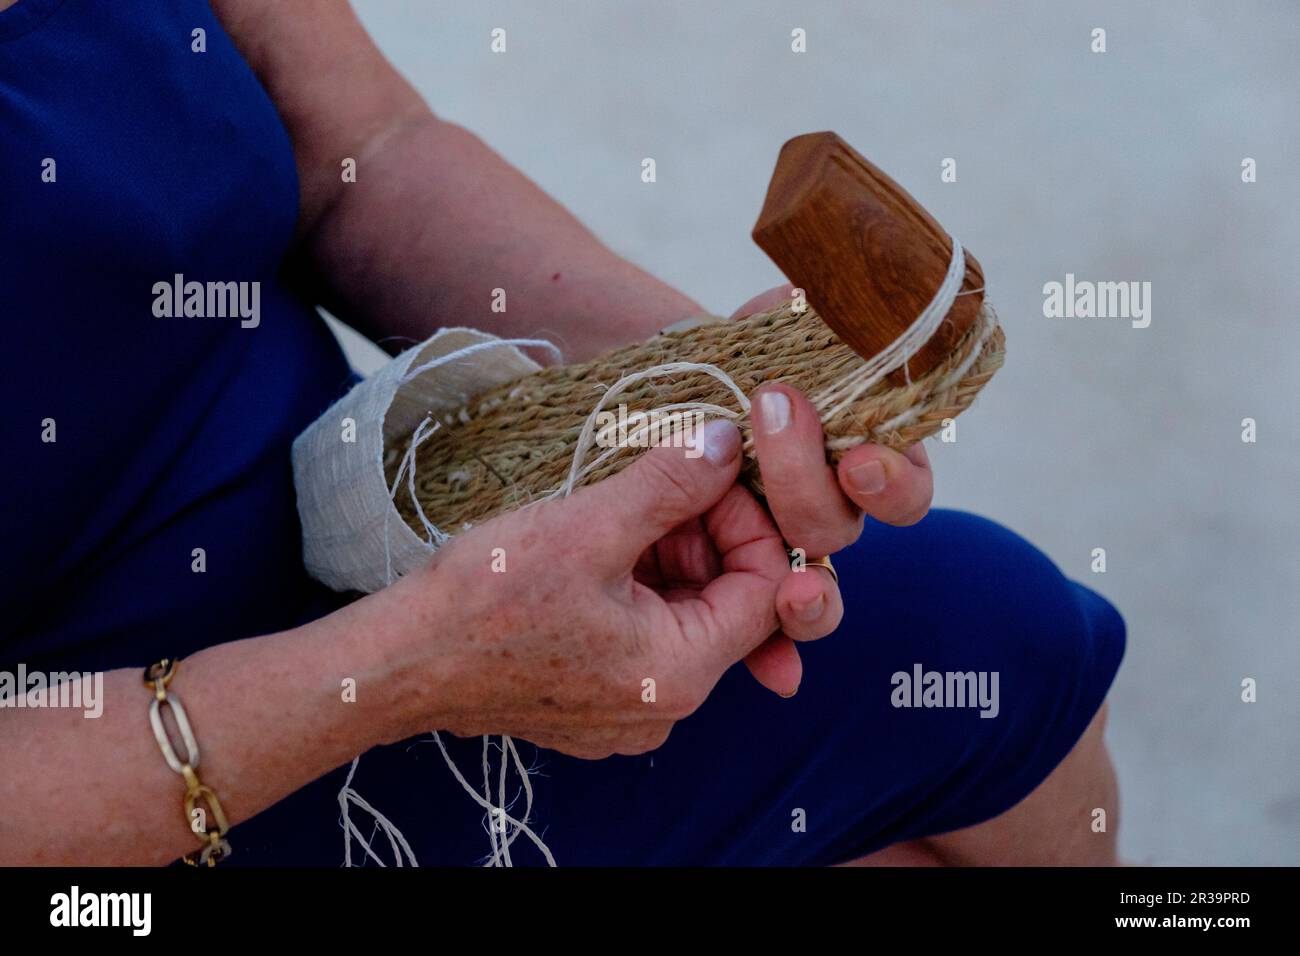 Traditional manufacturing of de espardenyes ibicencas, alpargatas ibicencas  (typical shoes from Ibiza), Ibiza, Balearic Islands, Spain Stock Photo -  Alamy